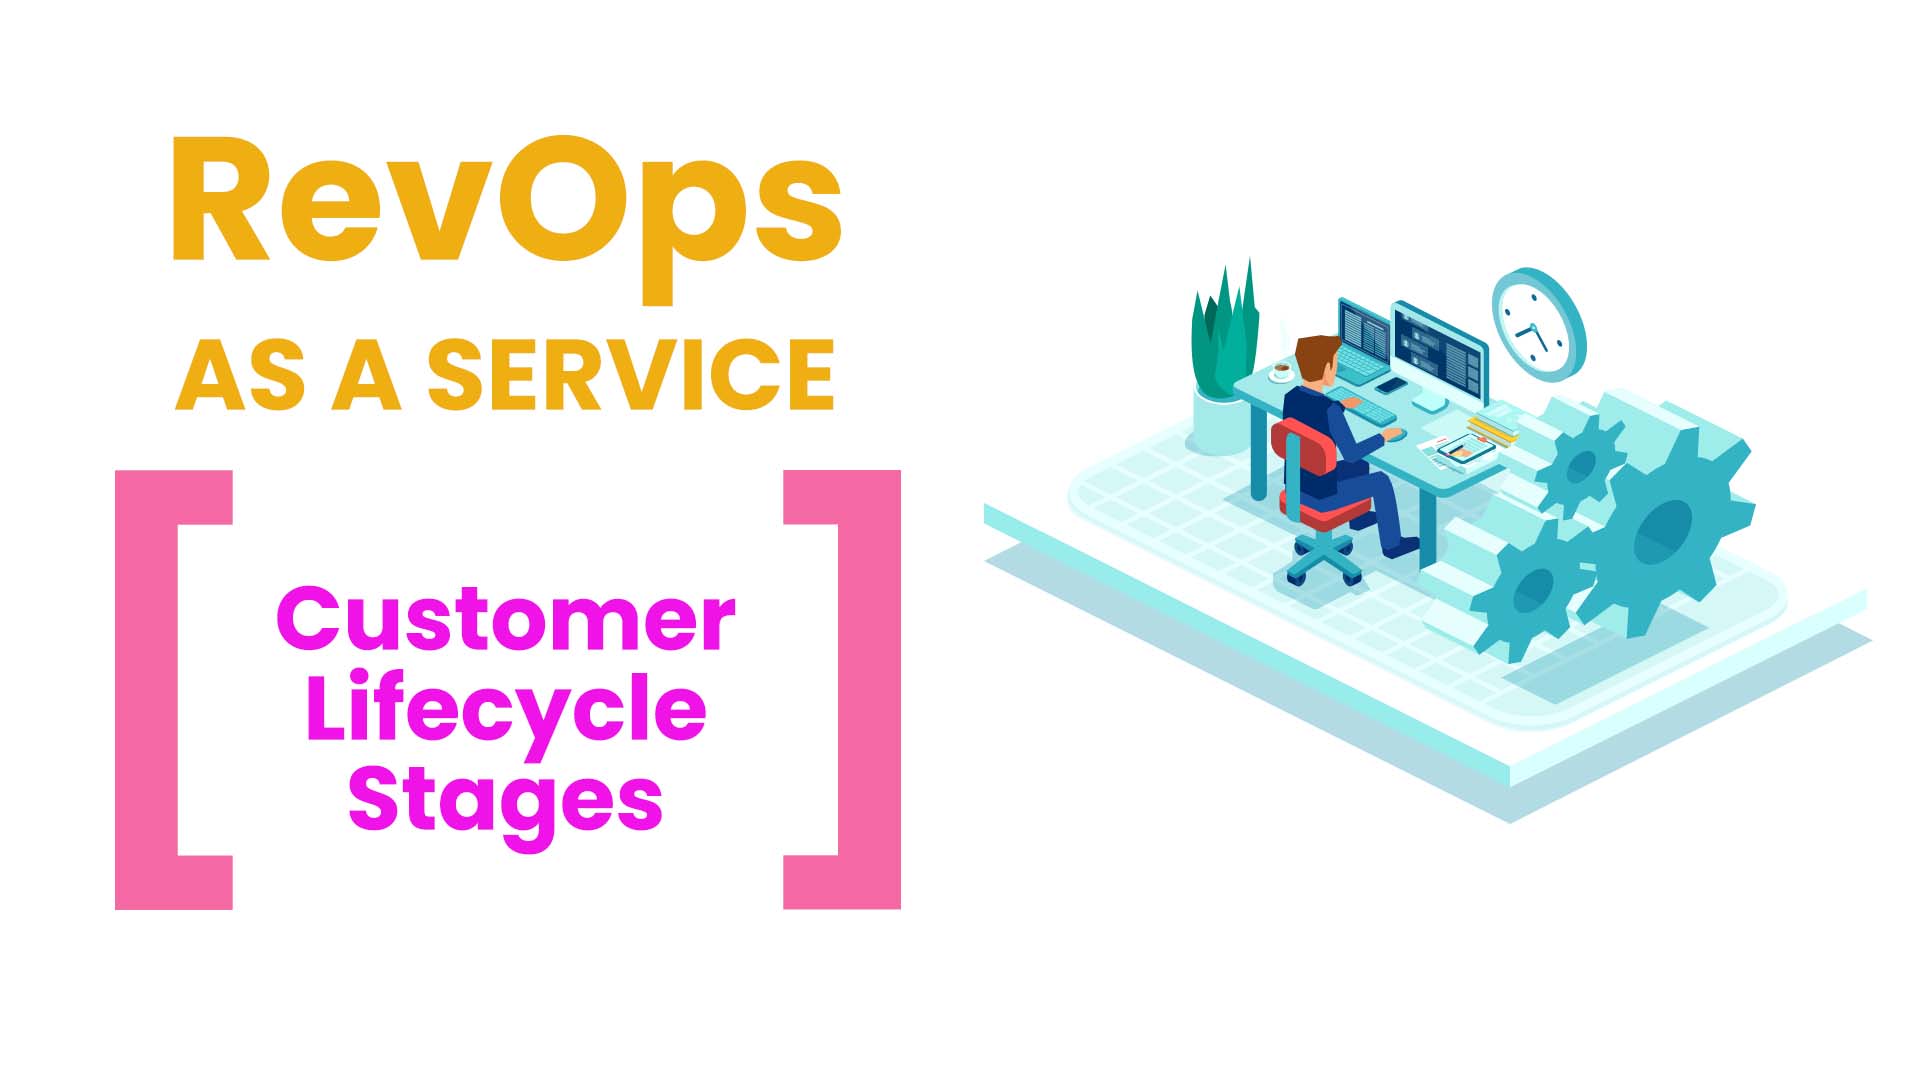 RevOps as a Service - Customer Lifecycle Stages